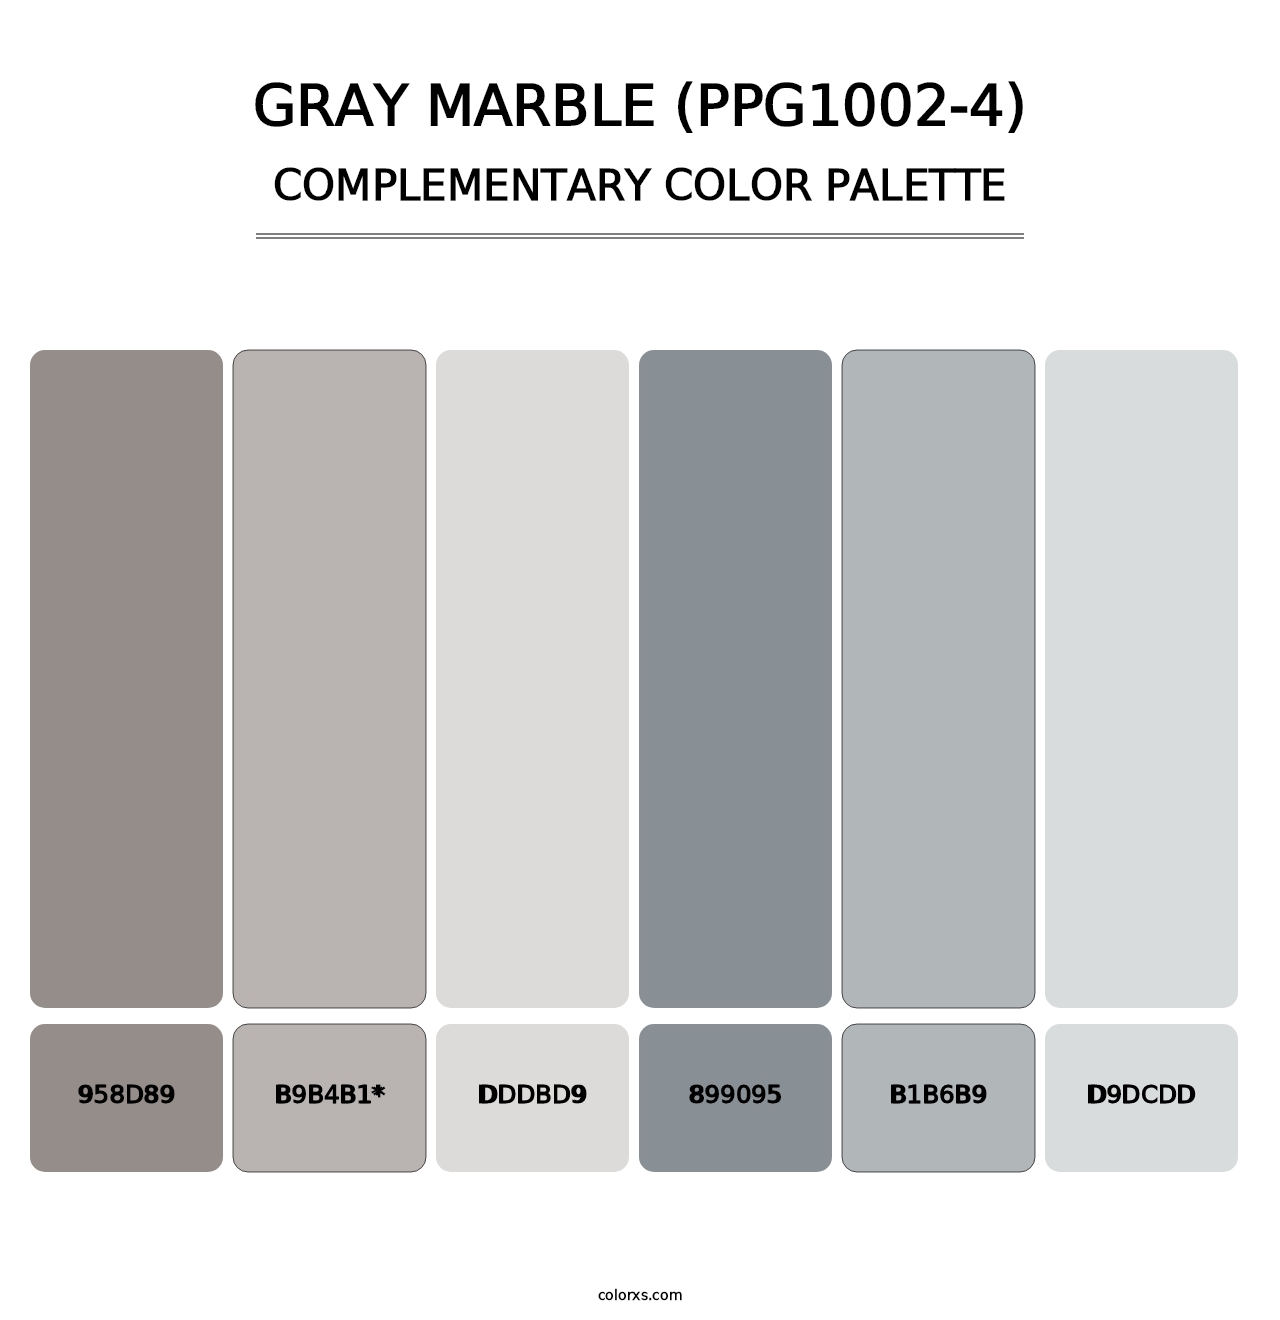 Gray Marble (PPG1002-4) - Complementary Color Palette